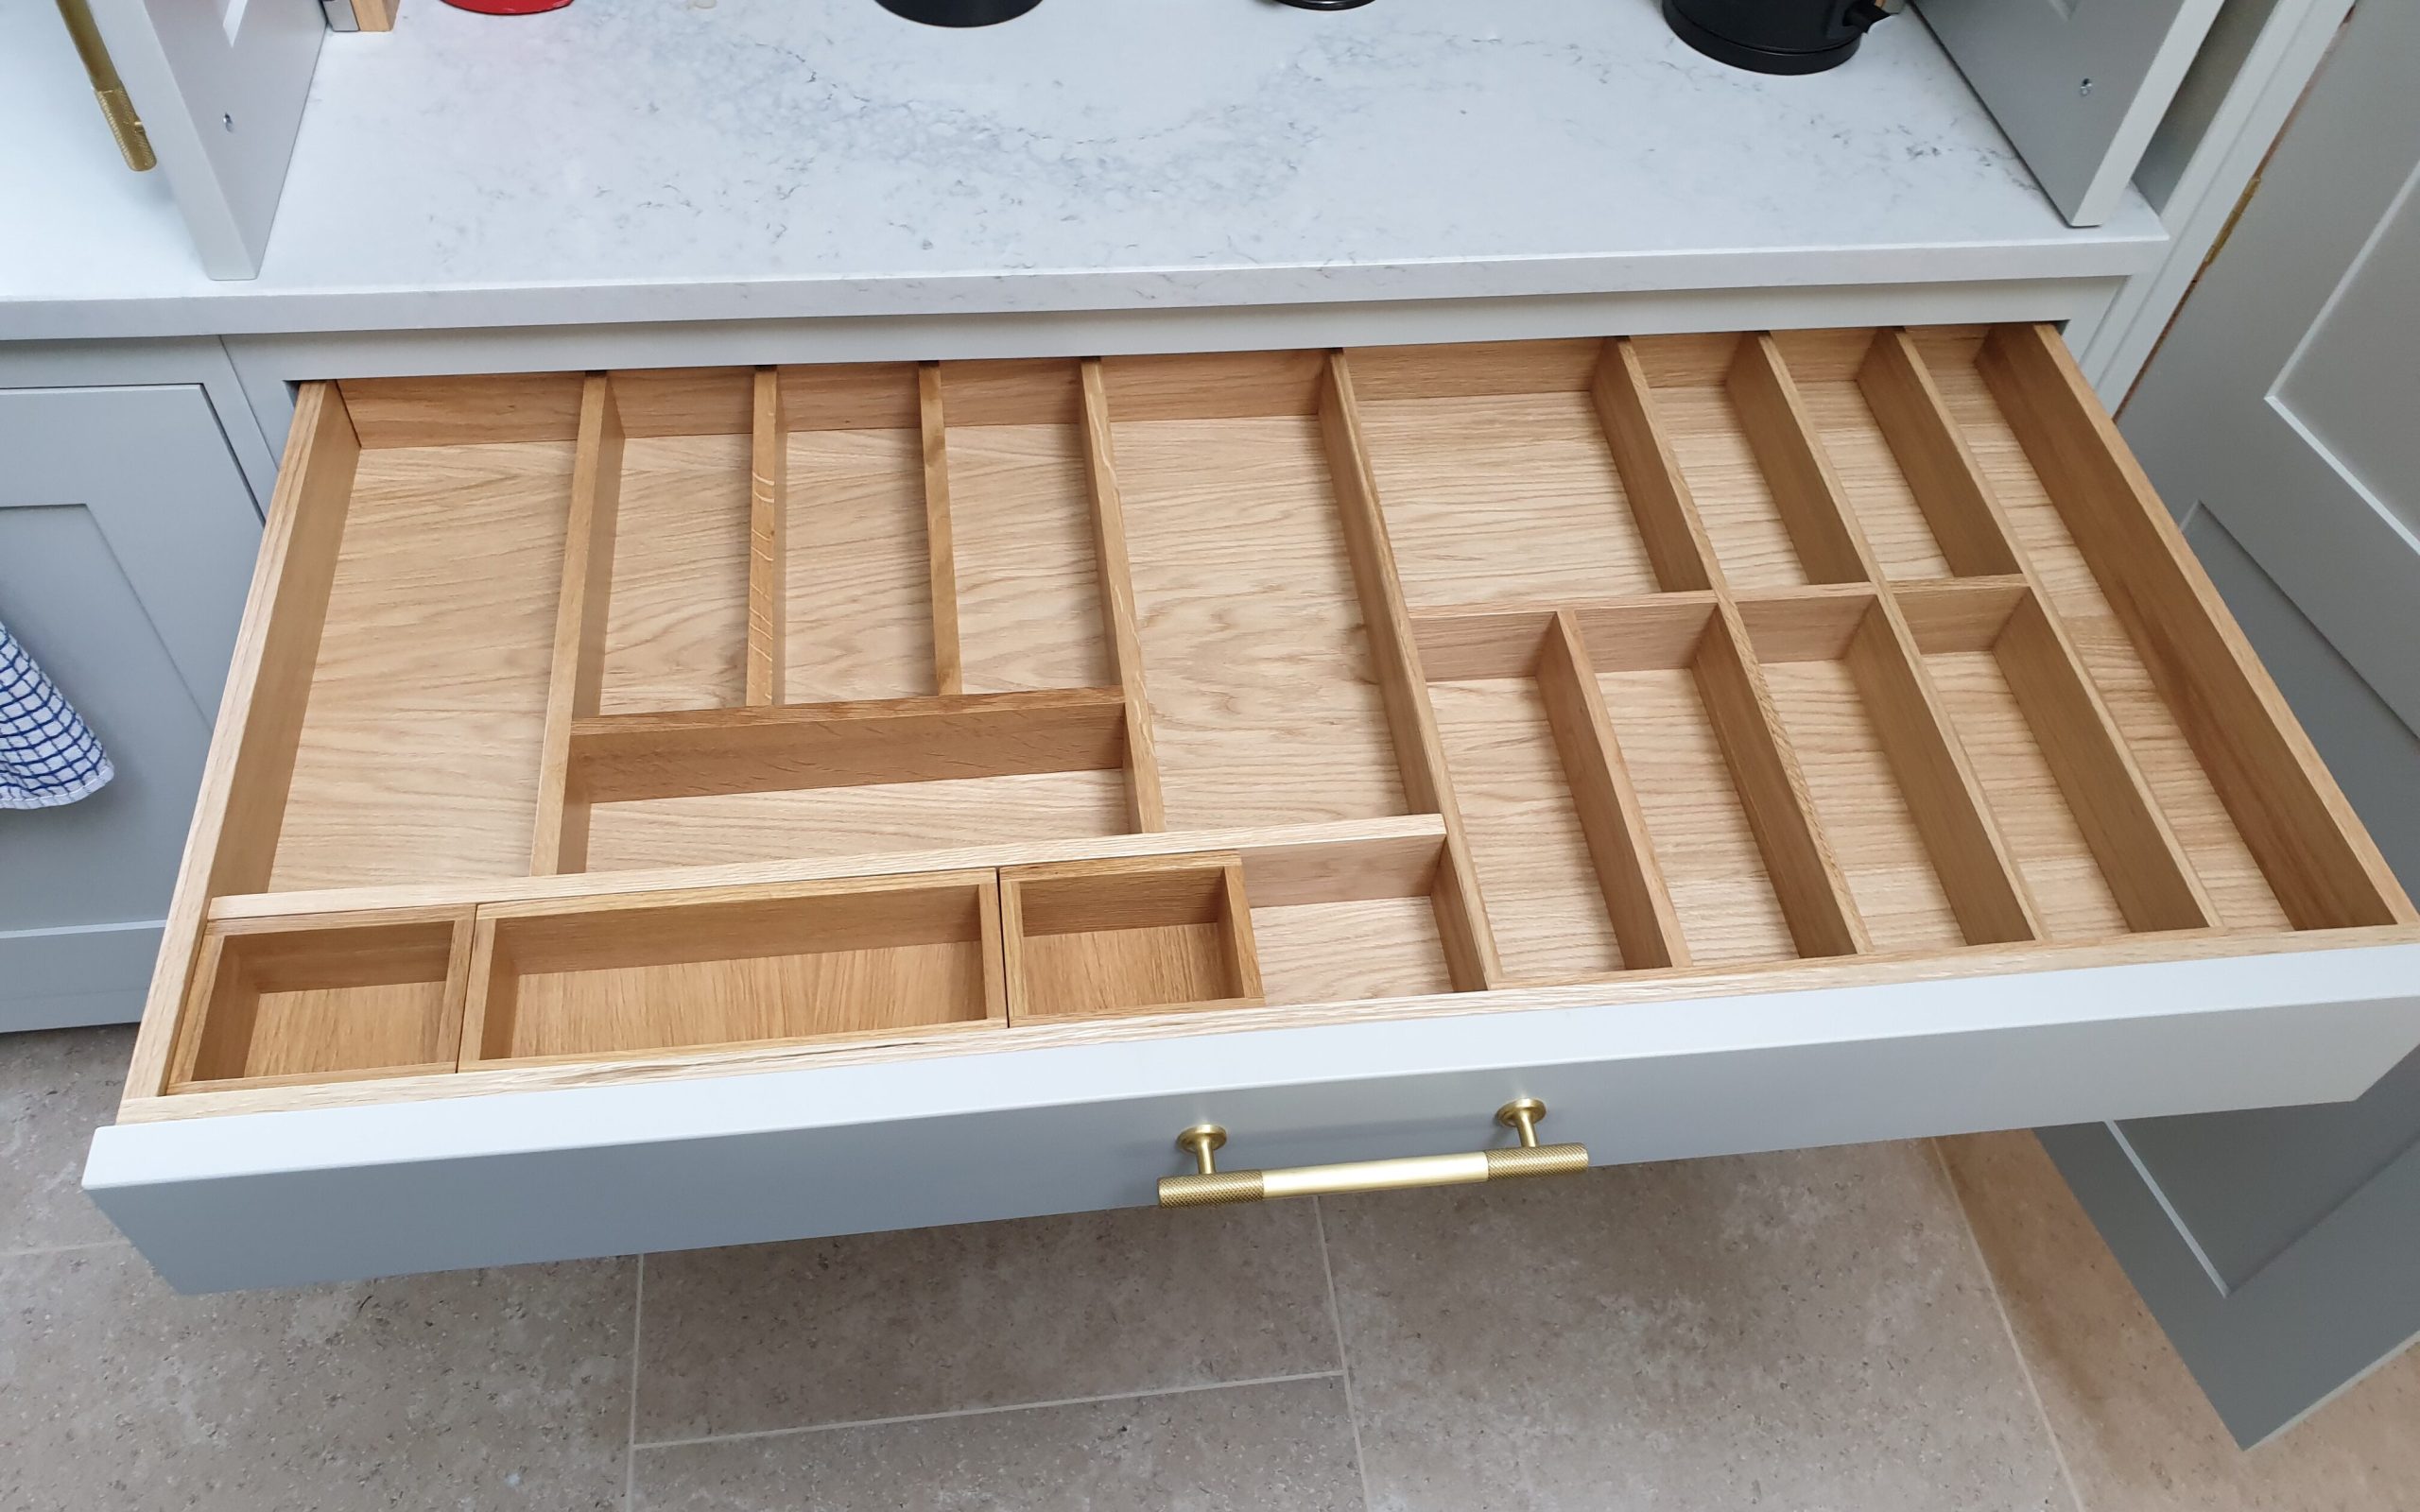 Drawers vs Shelves - Which is the Best Solution for Kitchen Organisation?